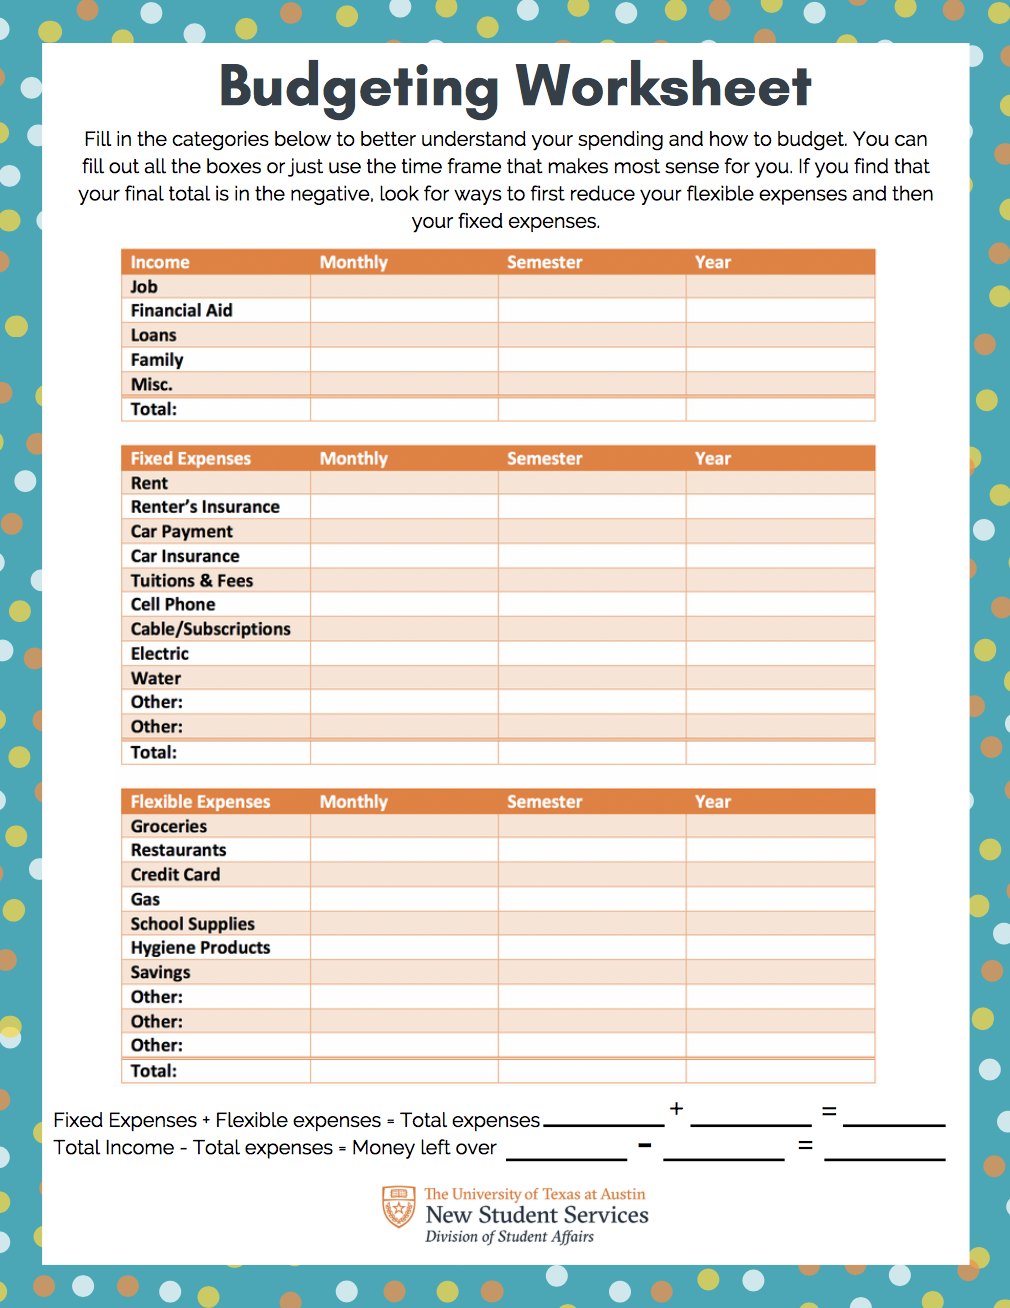 budget-printable-images-gallery-category-page-5-printableecom-free-budget-worksheet-living